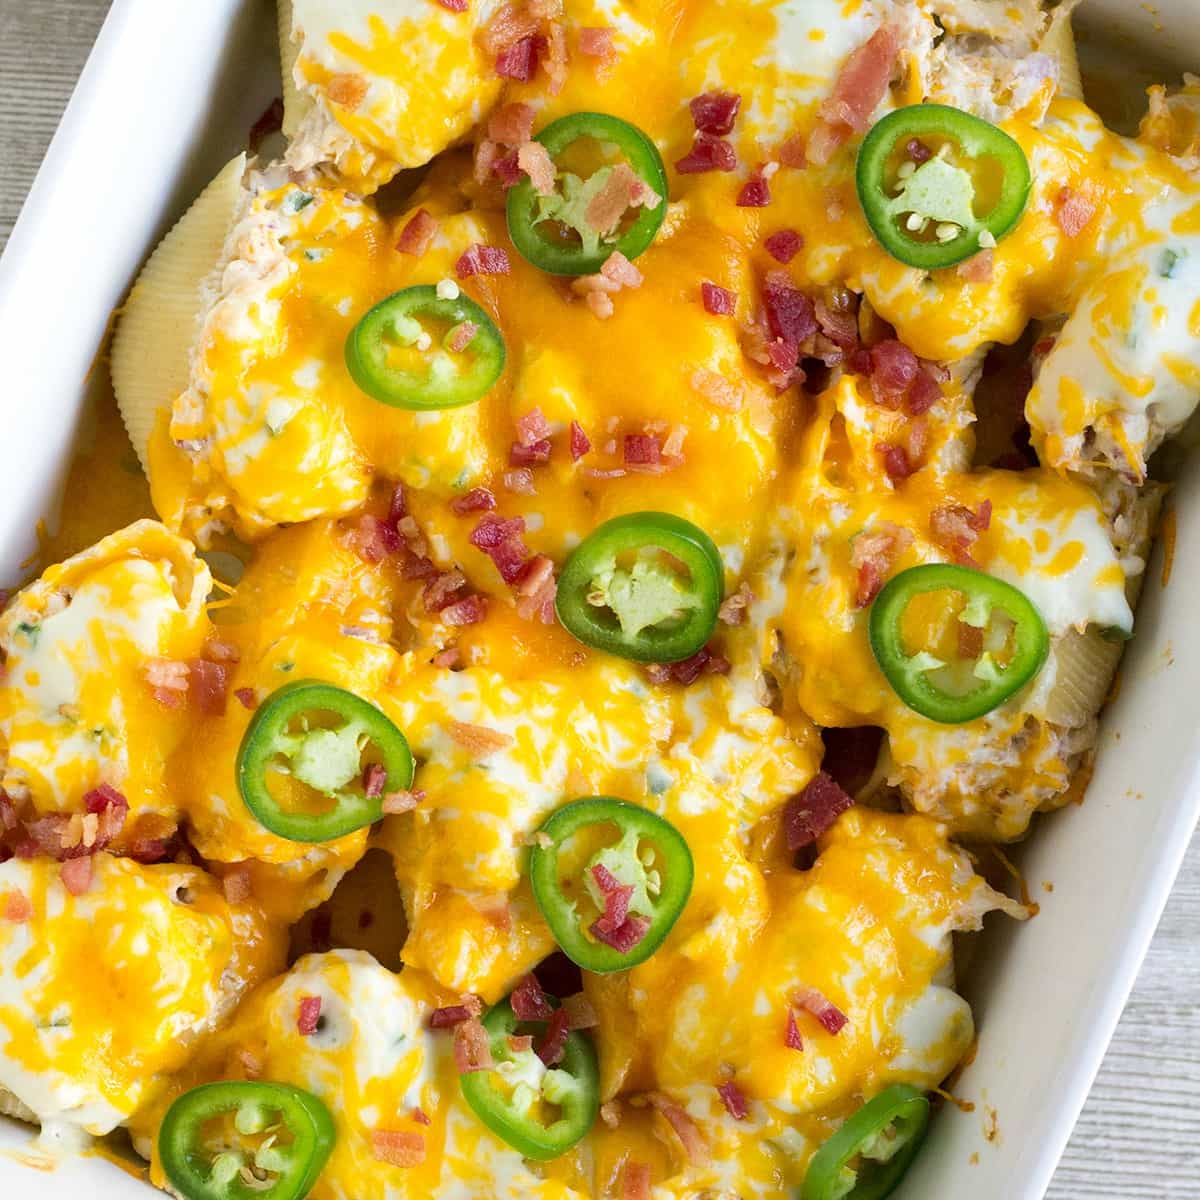 These Chicken Jalapeno Popper Stuffed Shells are a crave-able dinner perfect for busy weeknights!